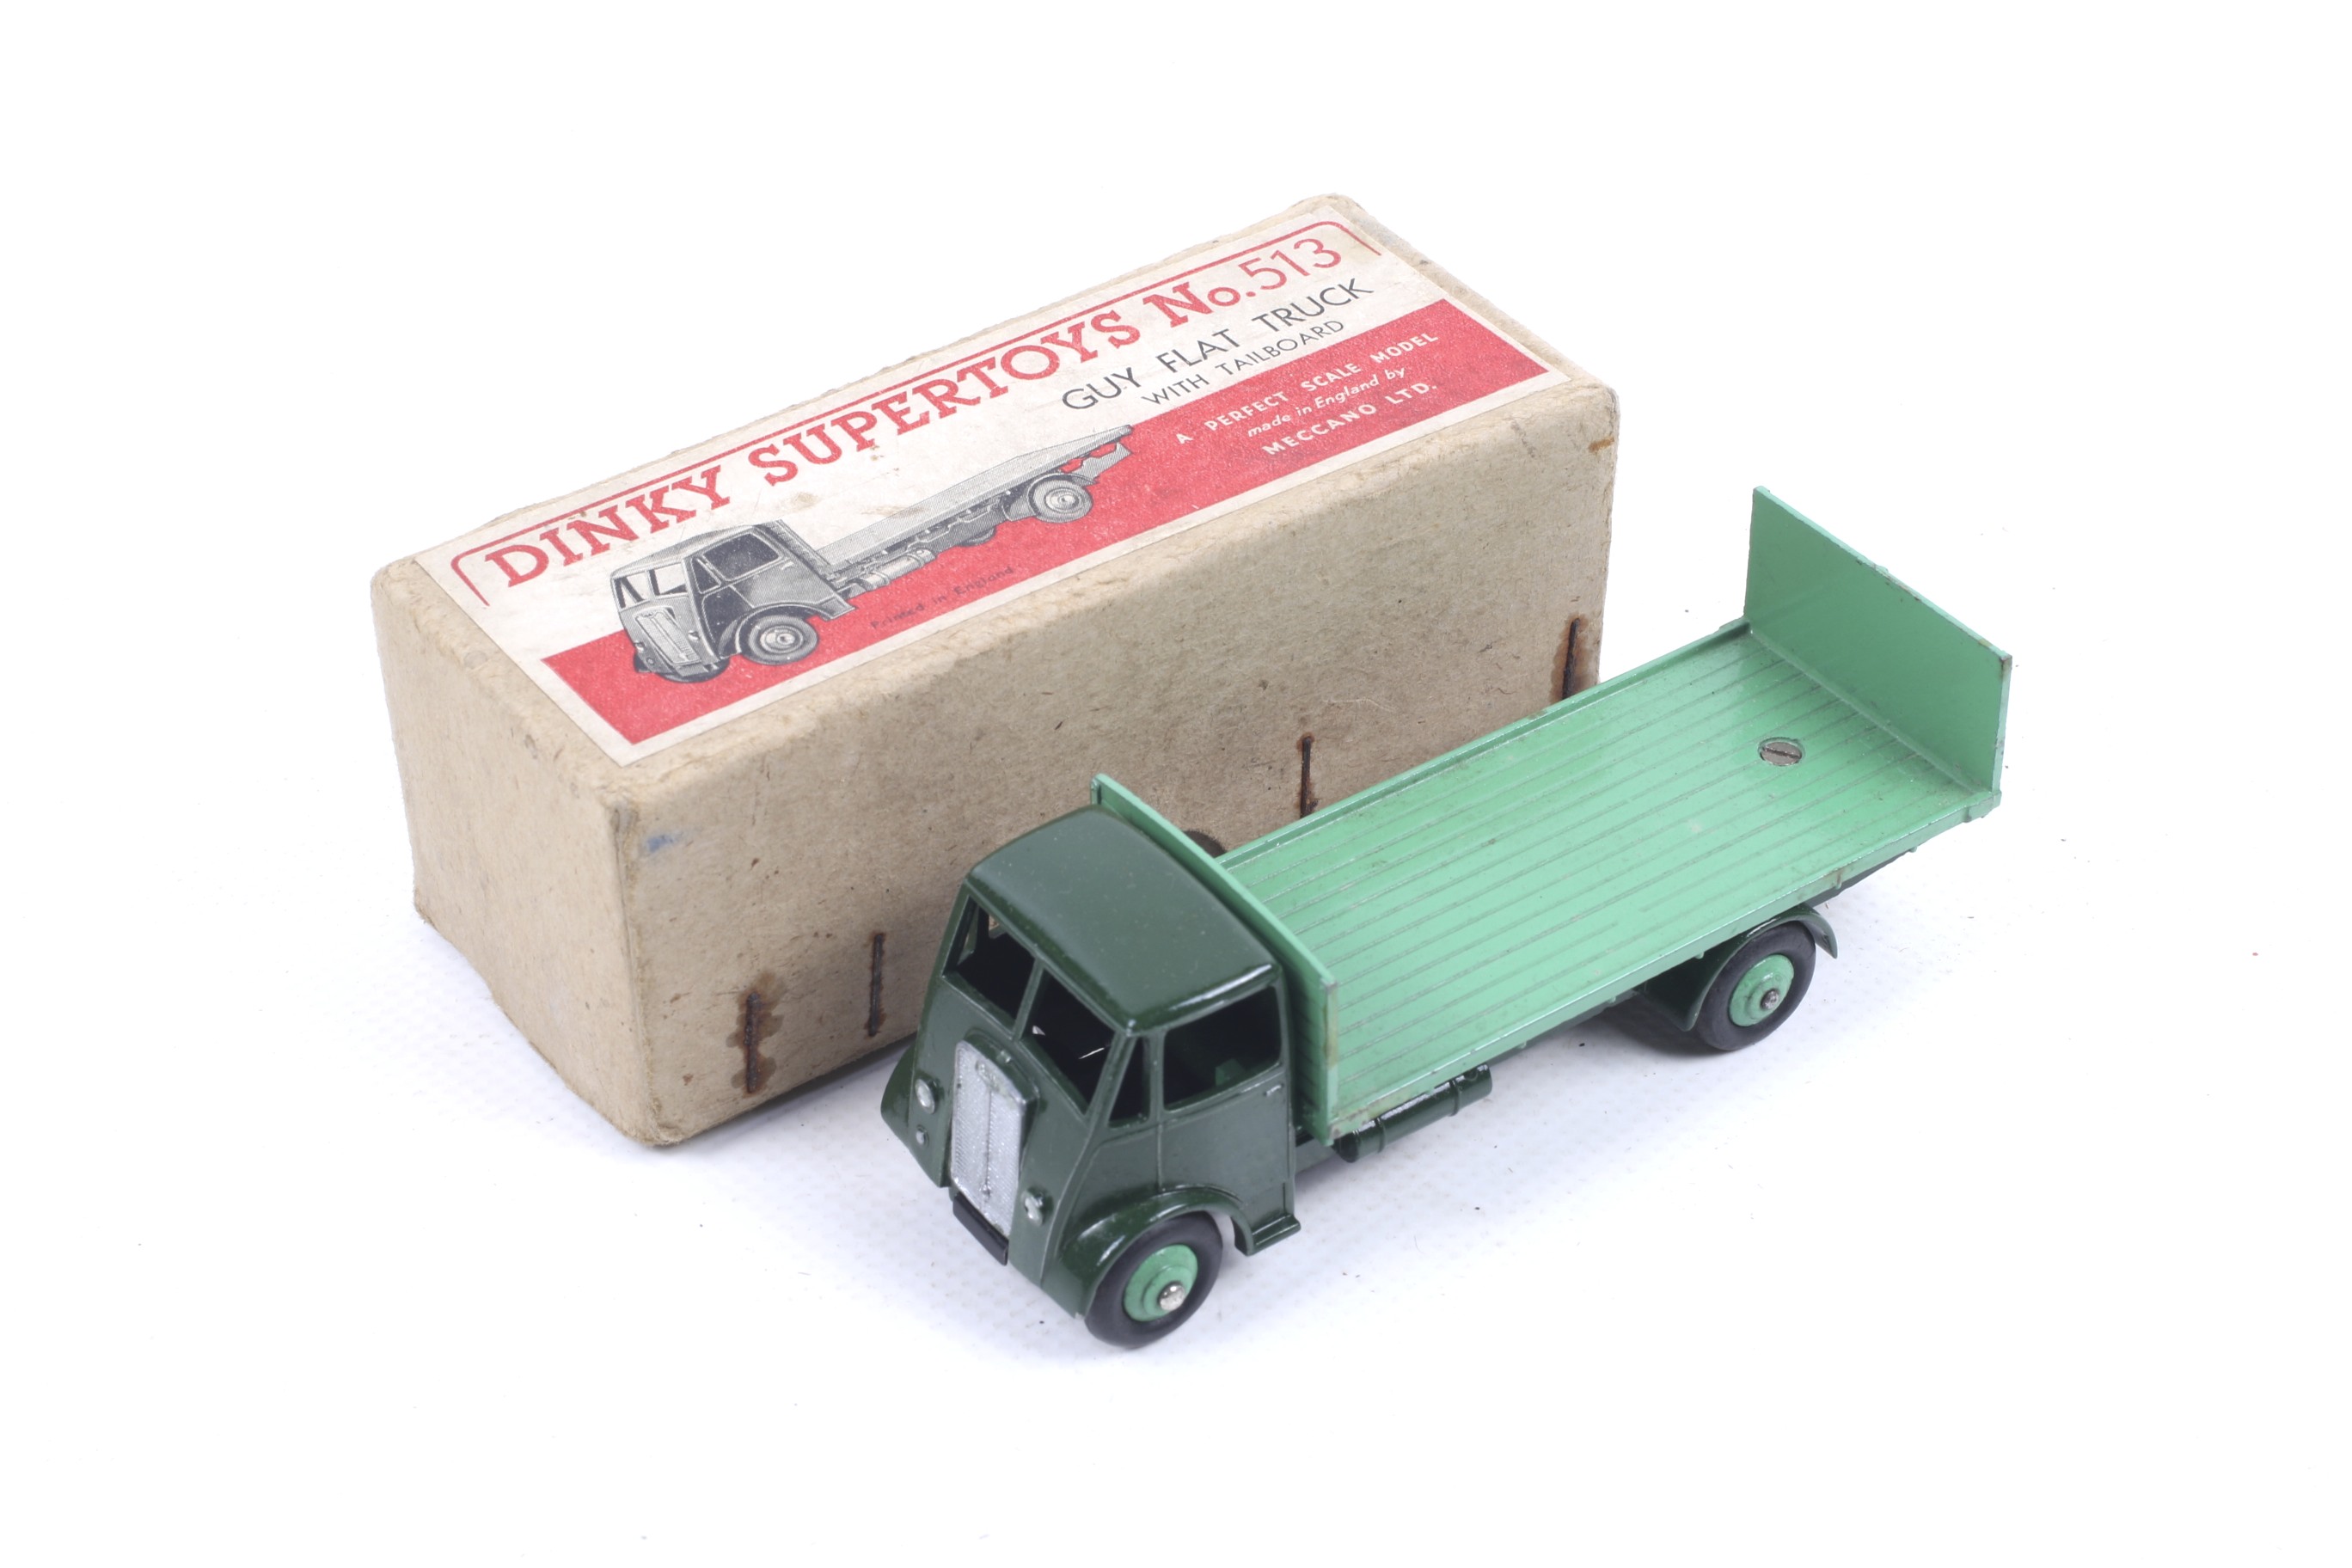 A Dinky diecast Guy Flatbed Truck. No. 513, dark green body with light green bed, in original box.